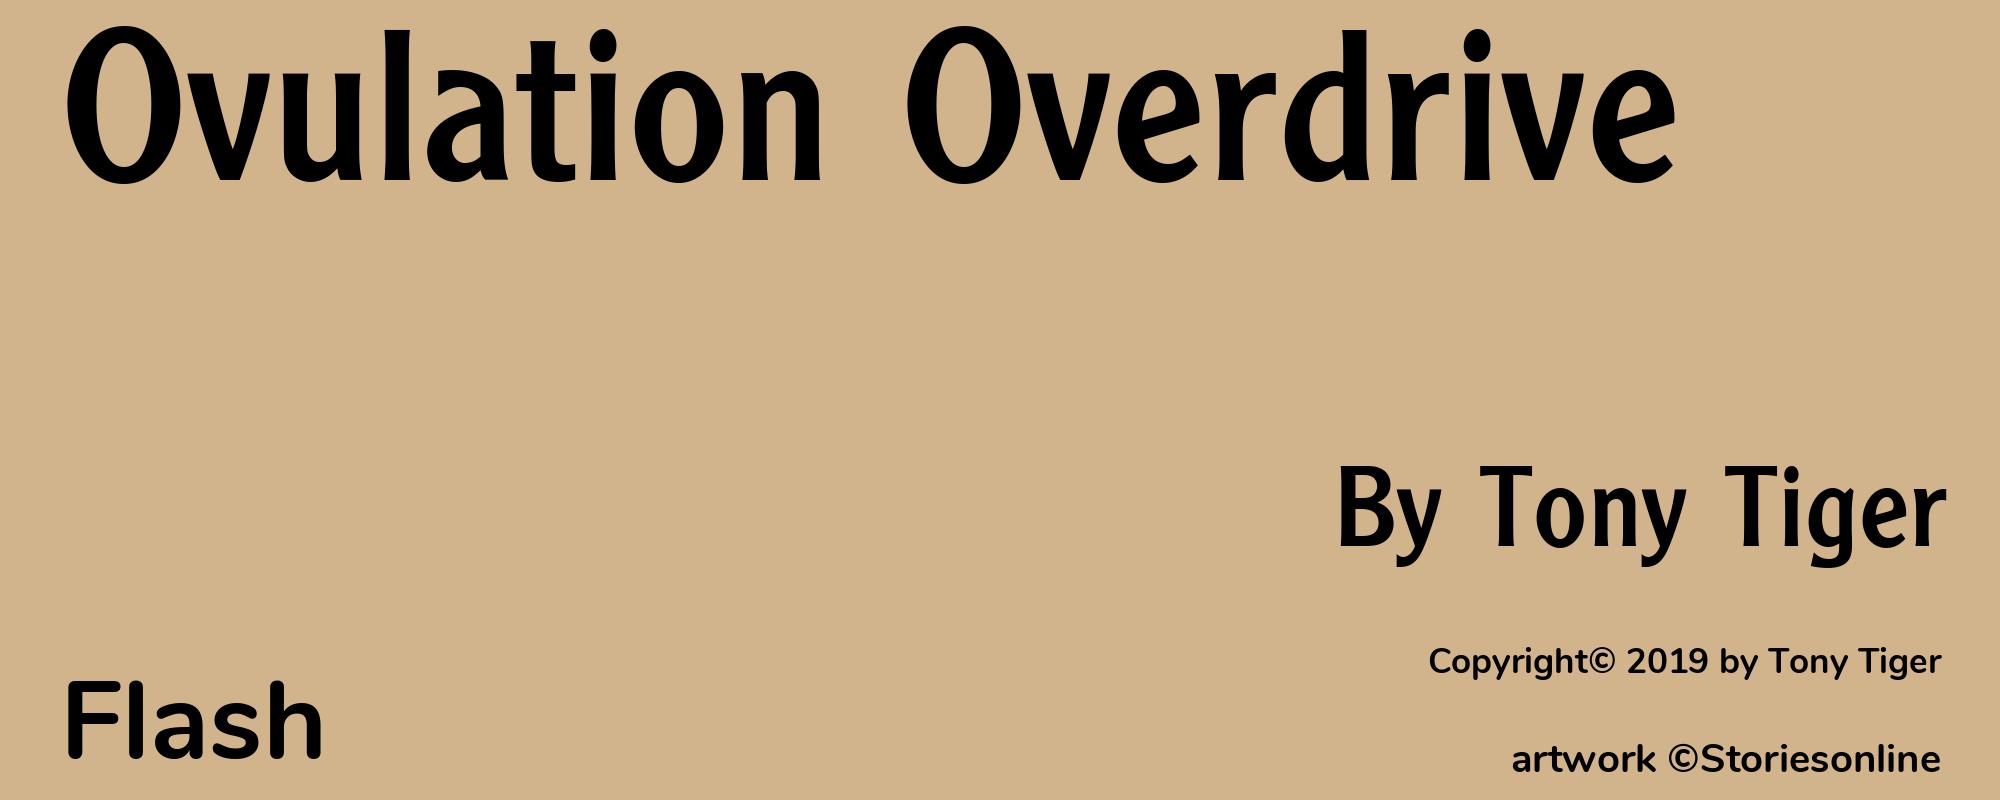 Ovulation Overdrive - Cover